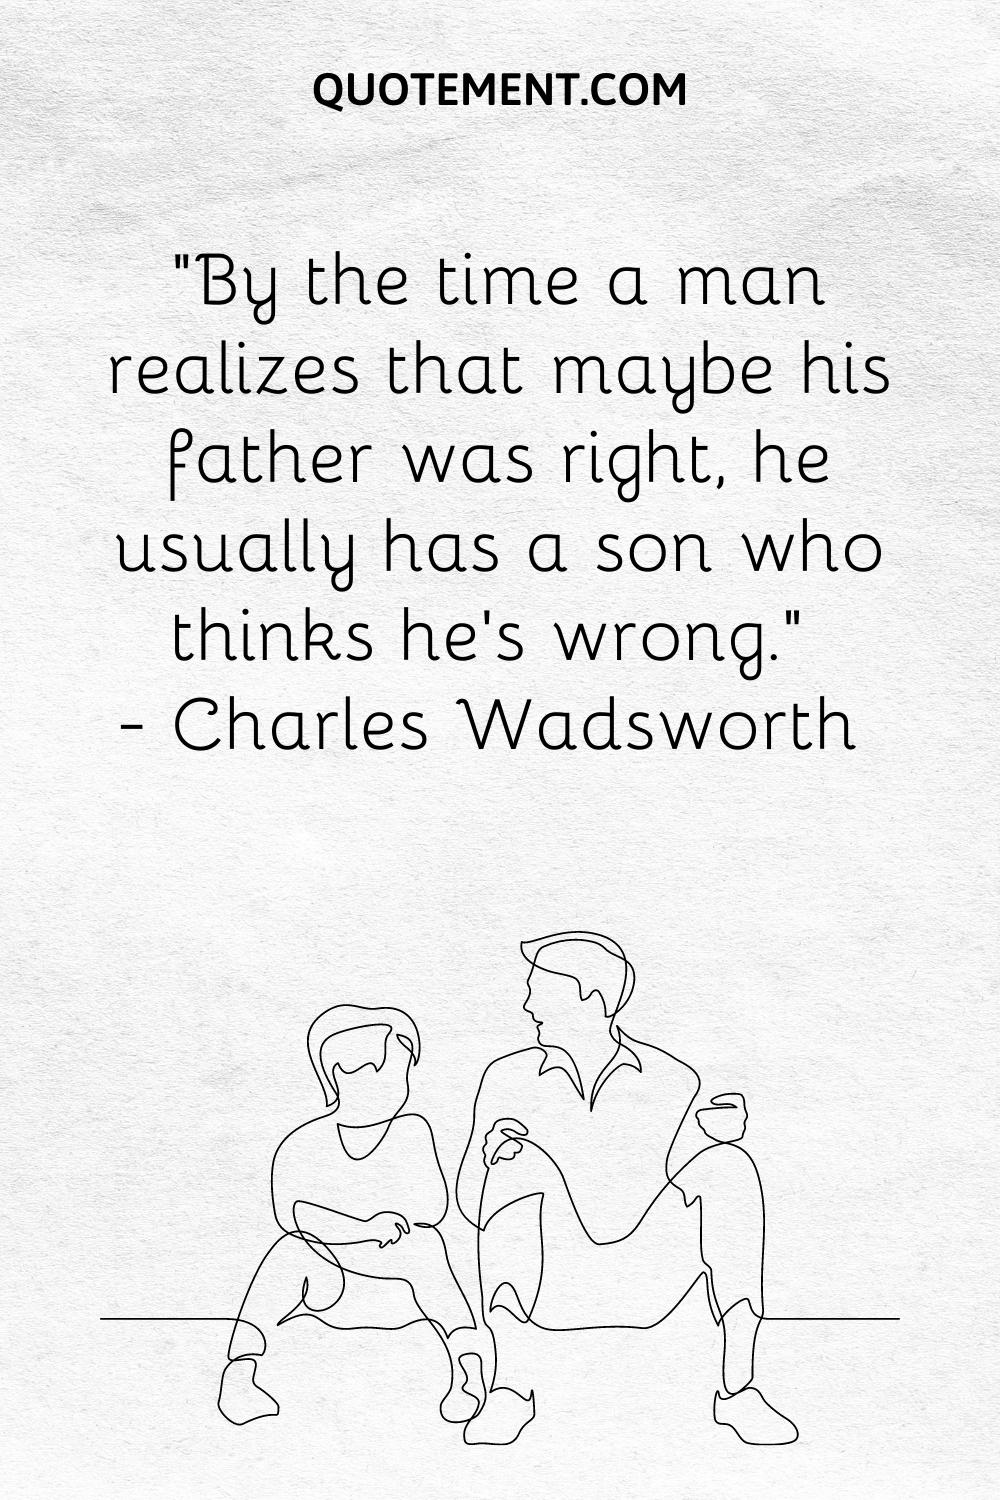 “By the time a man realizes that maybe his father was right, he usually has a son who thinks he’s wrong.” — Charles Wadsworth